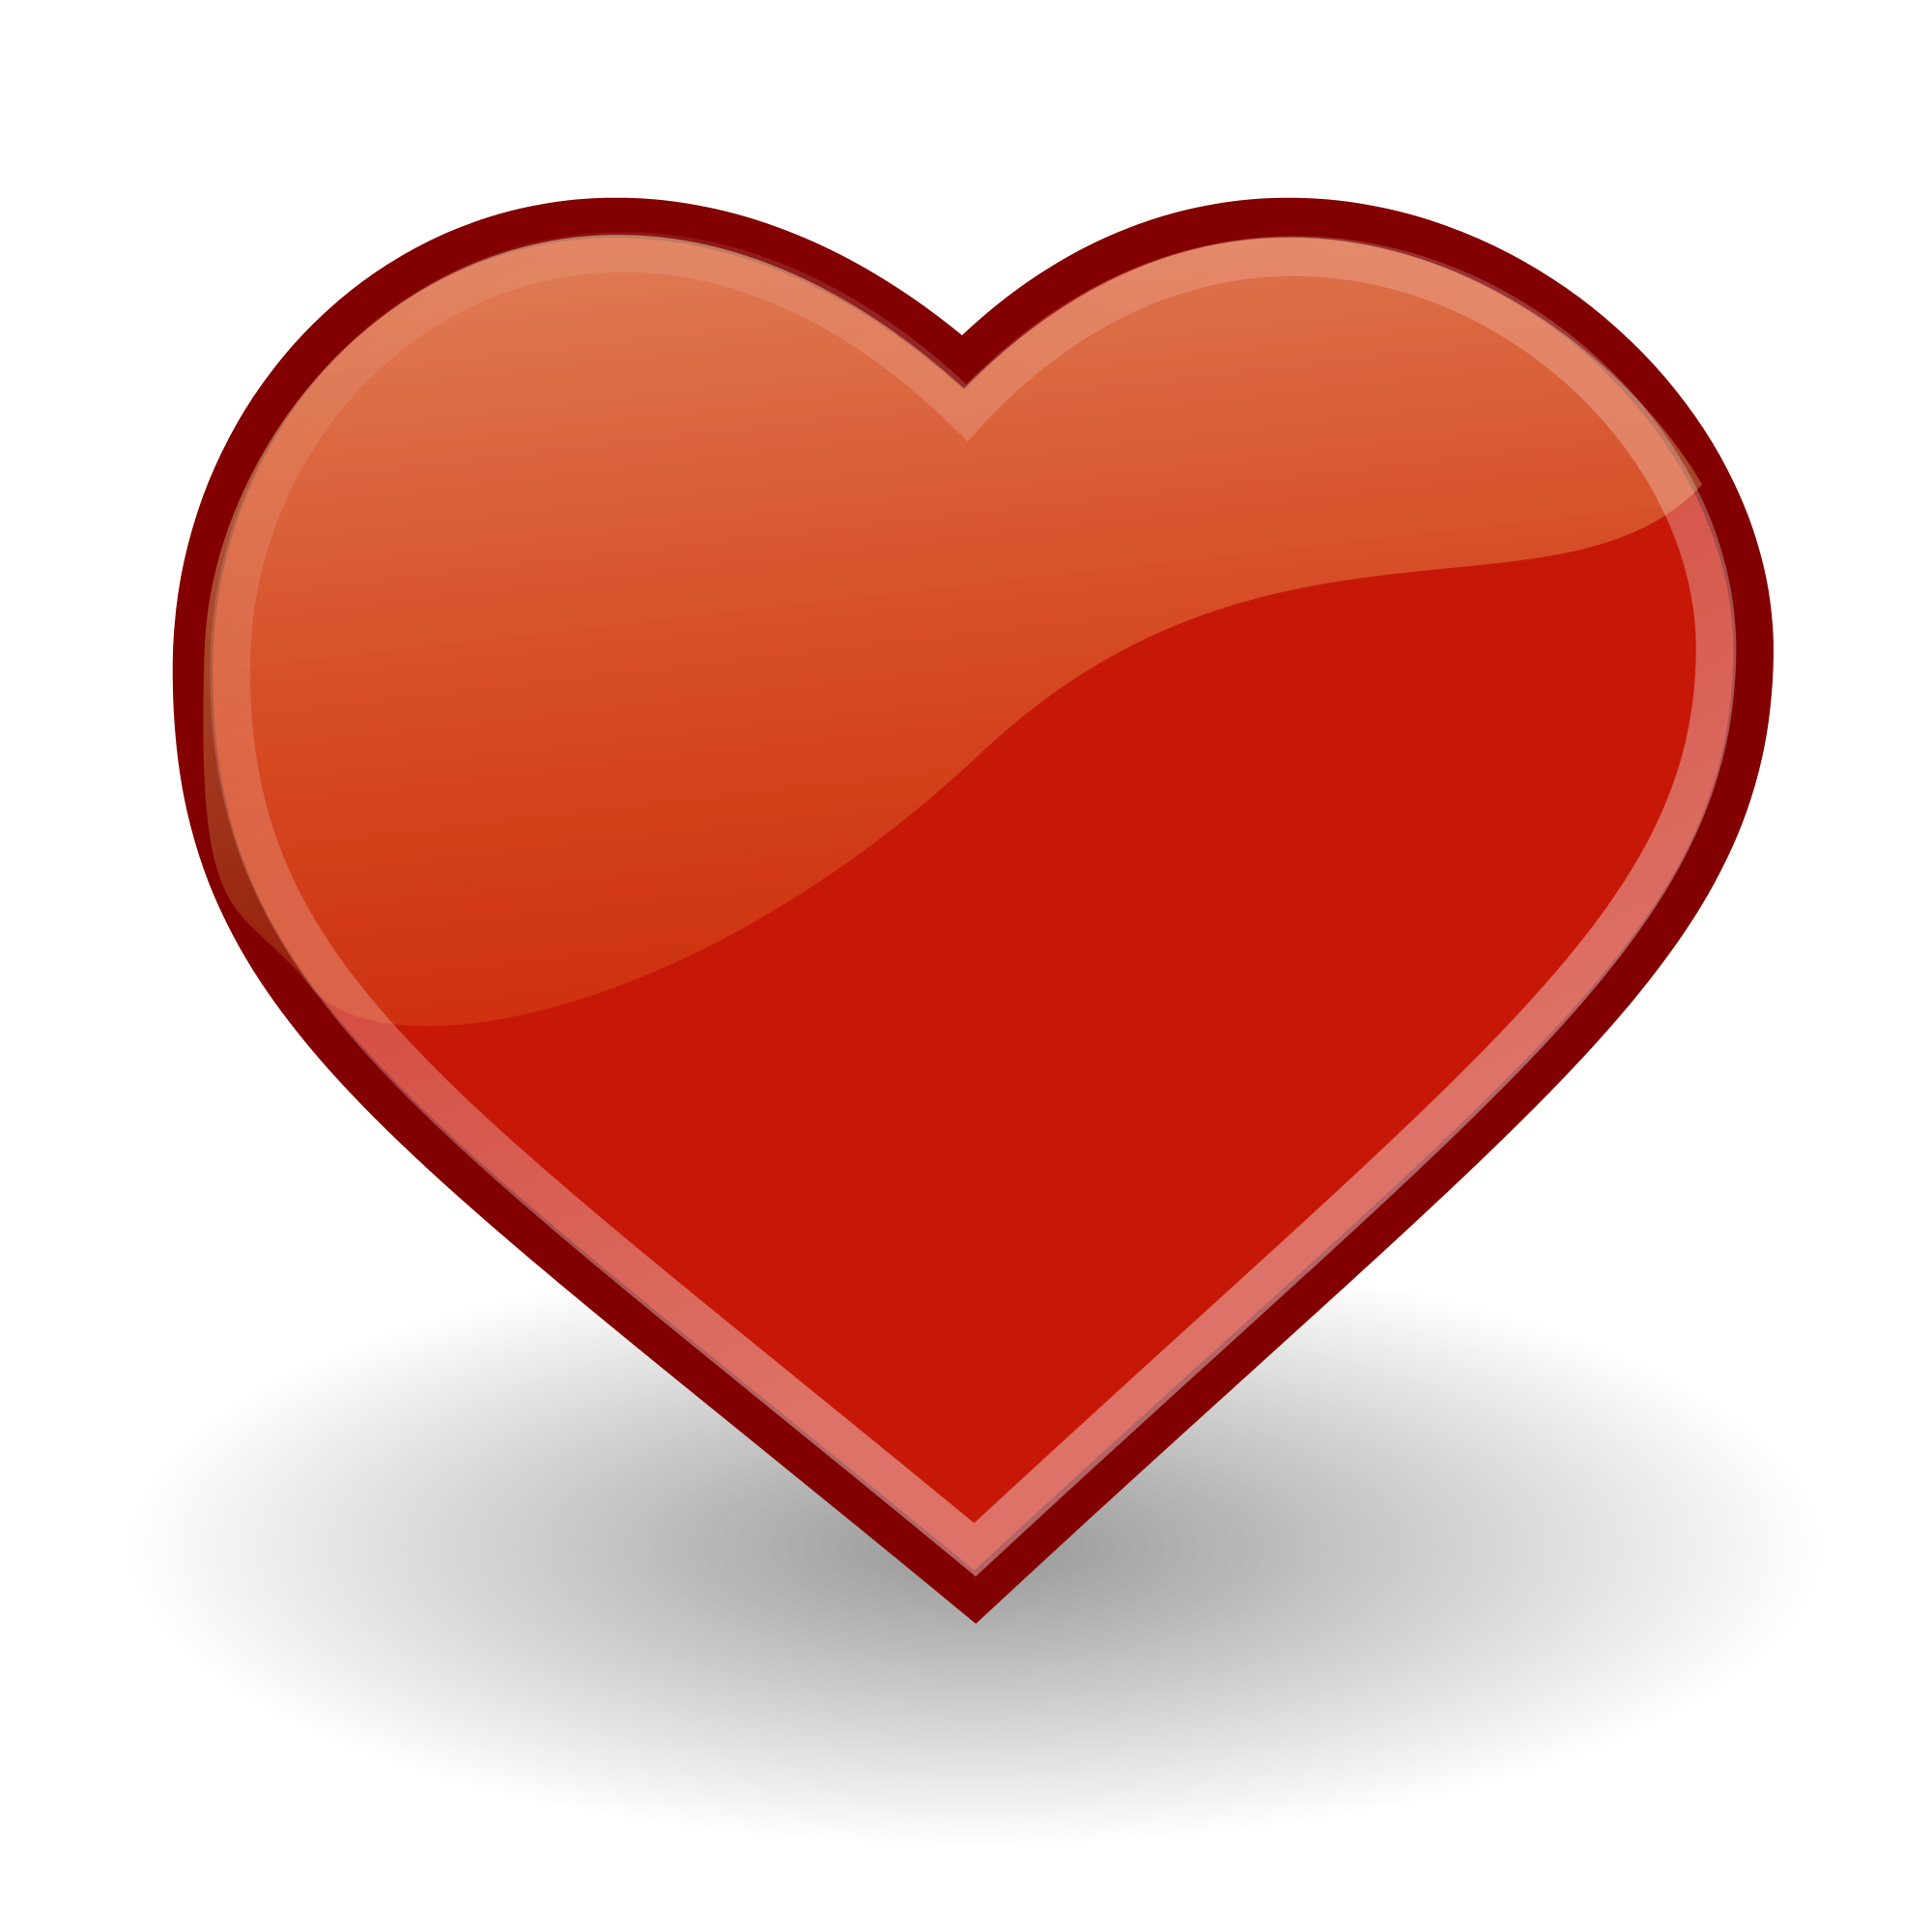 Free Pictures Of Hearts And Love - ClipArt Best